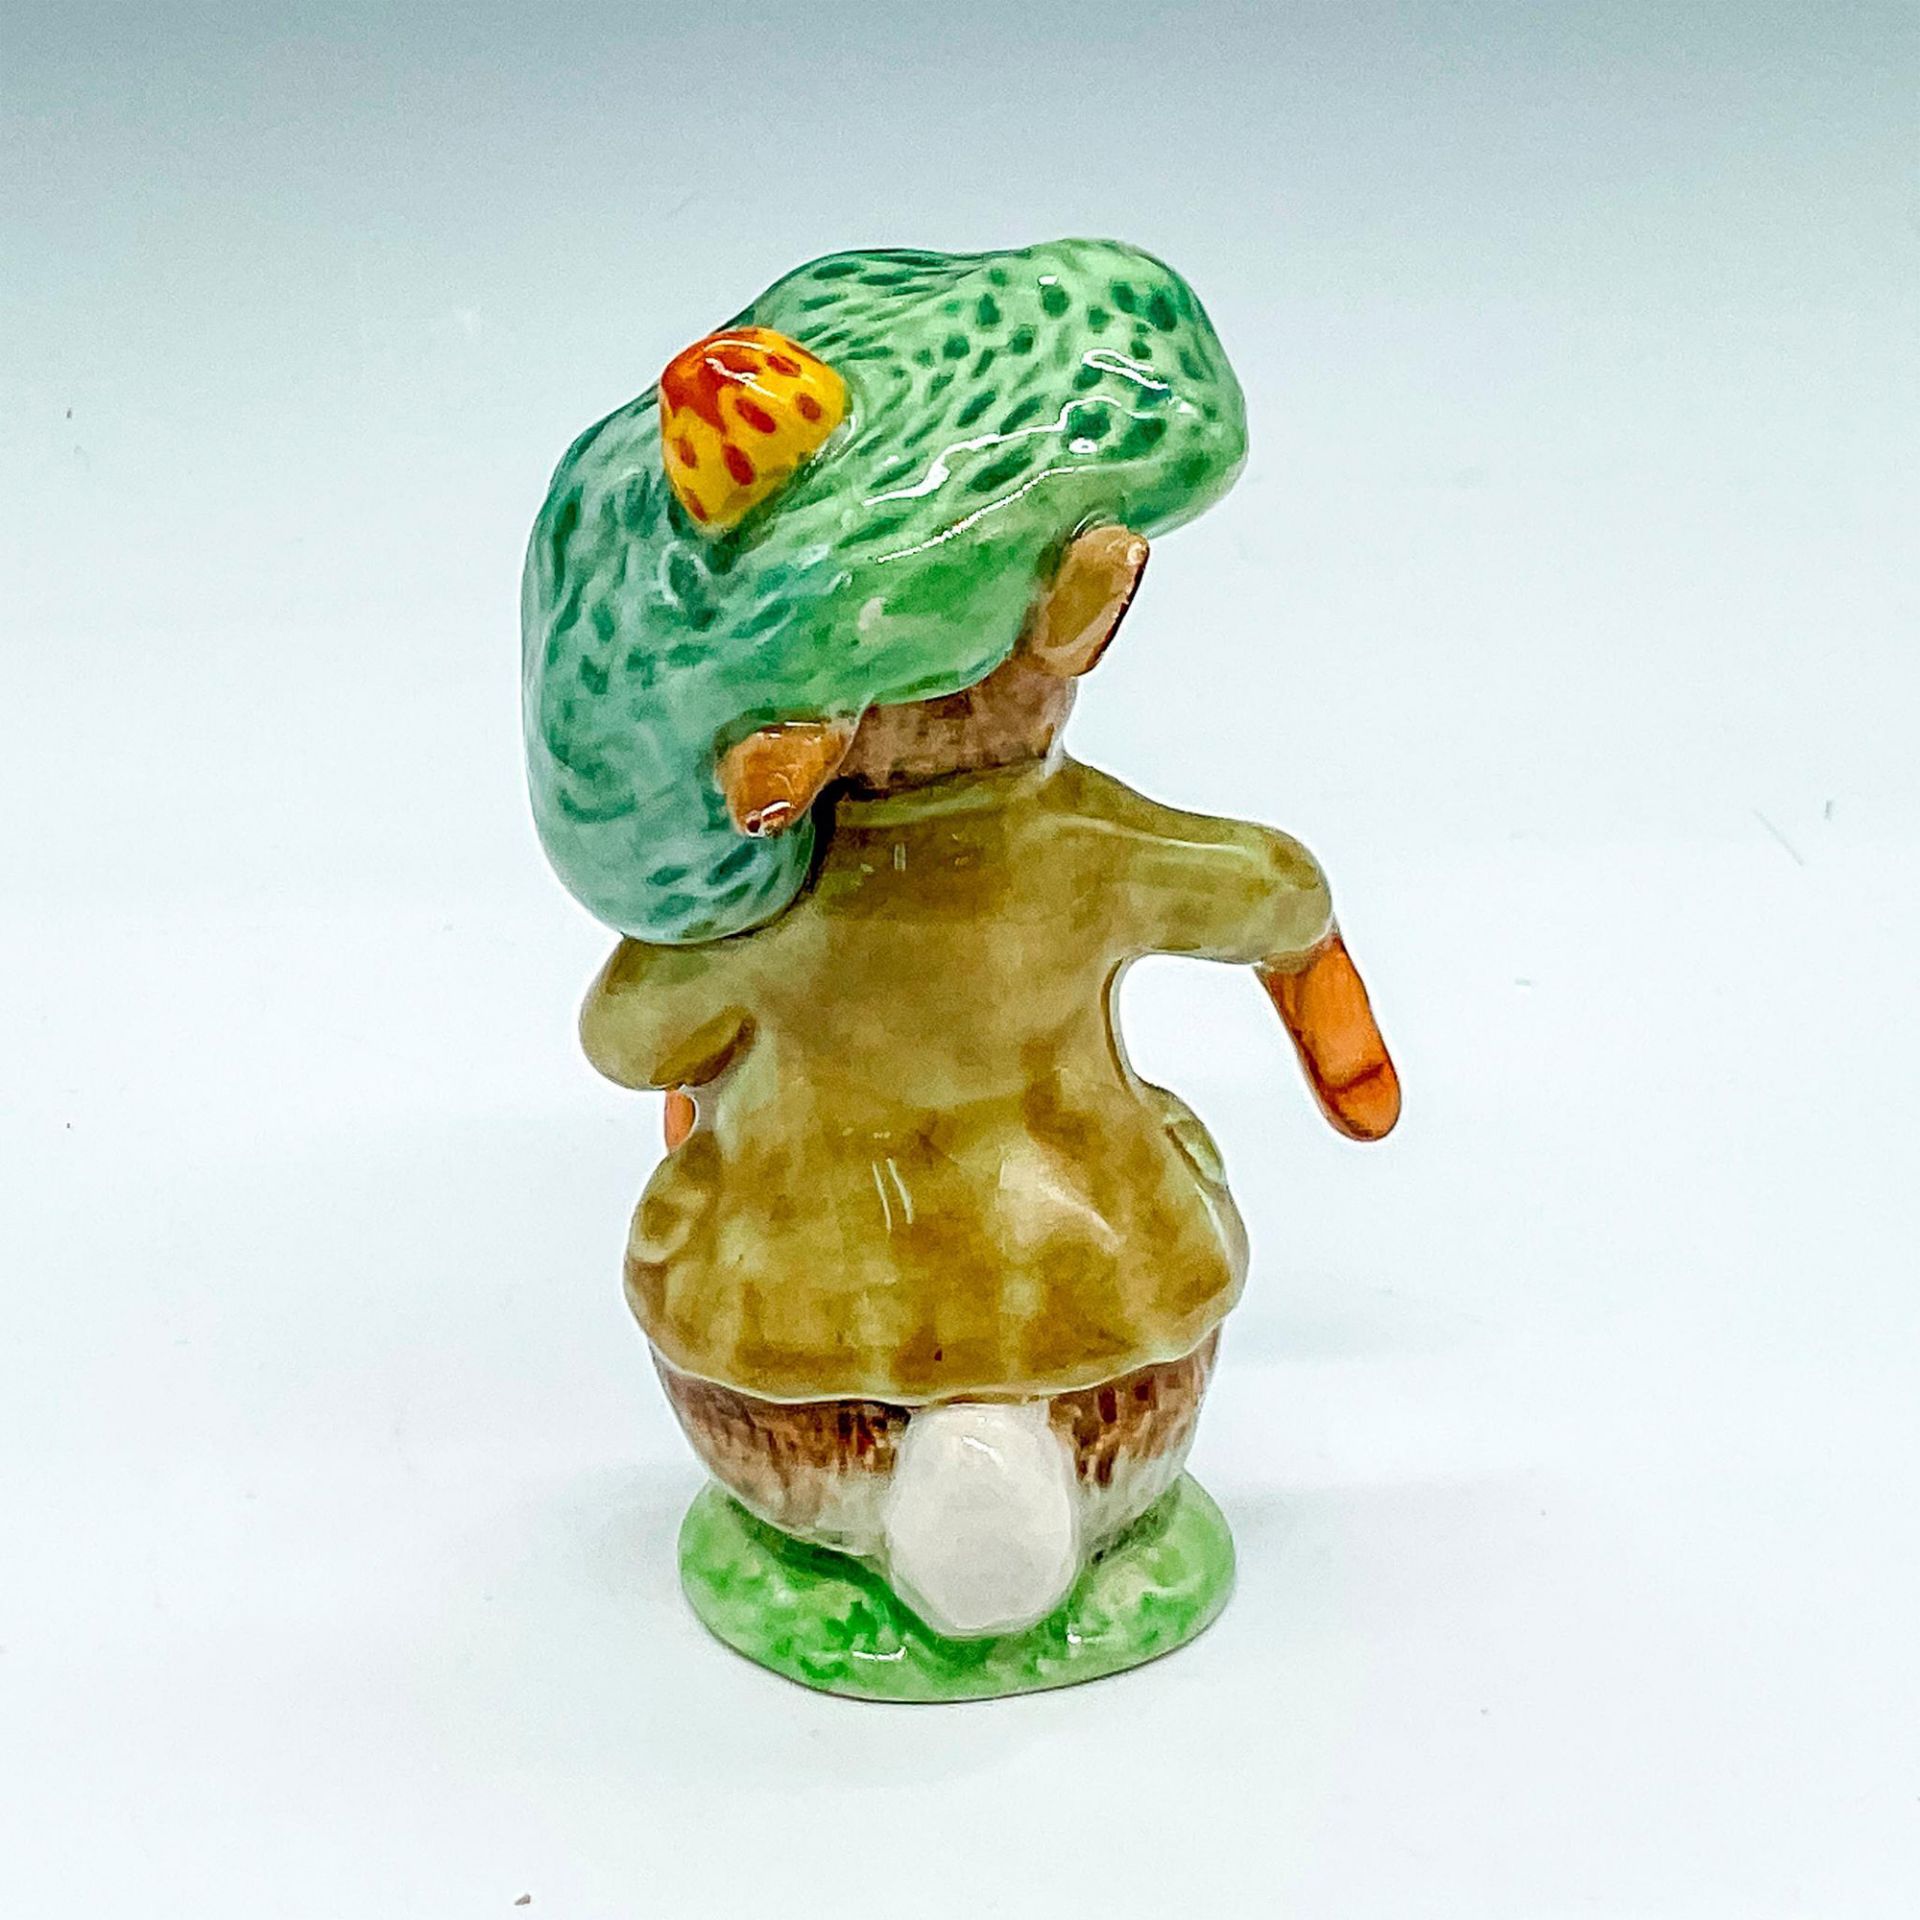 Beswick Beatrix Potter's Figurine, Benjamin Bunny (Ears Out) - Image 2 of 3